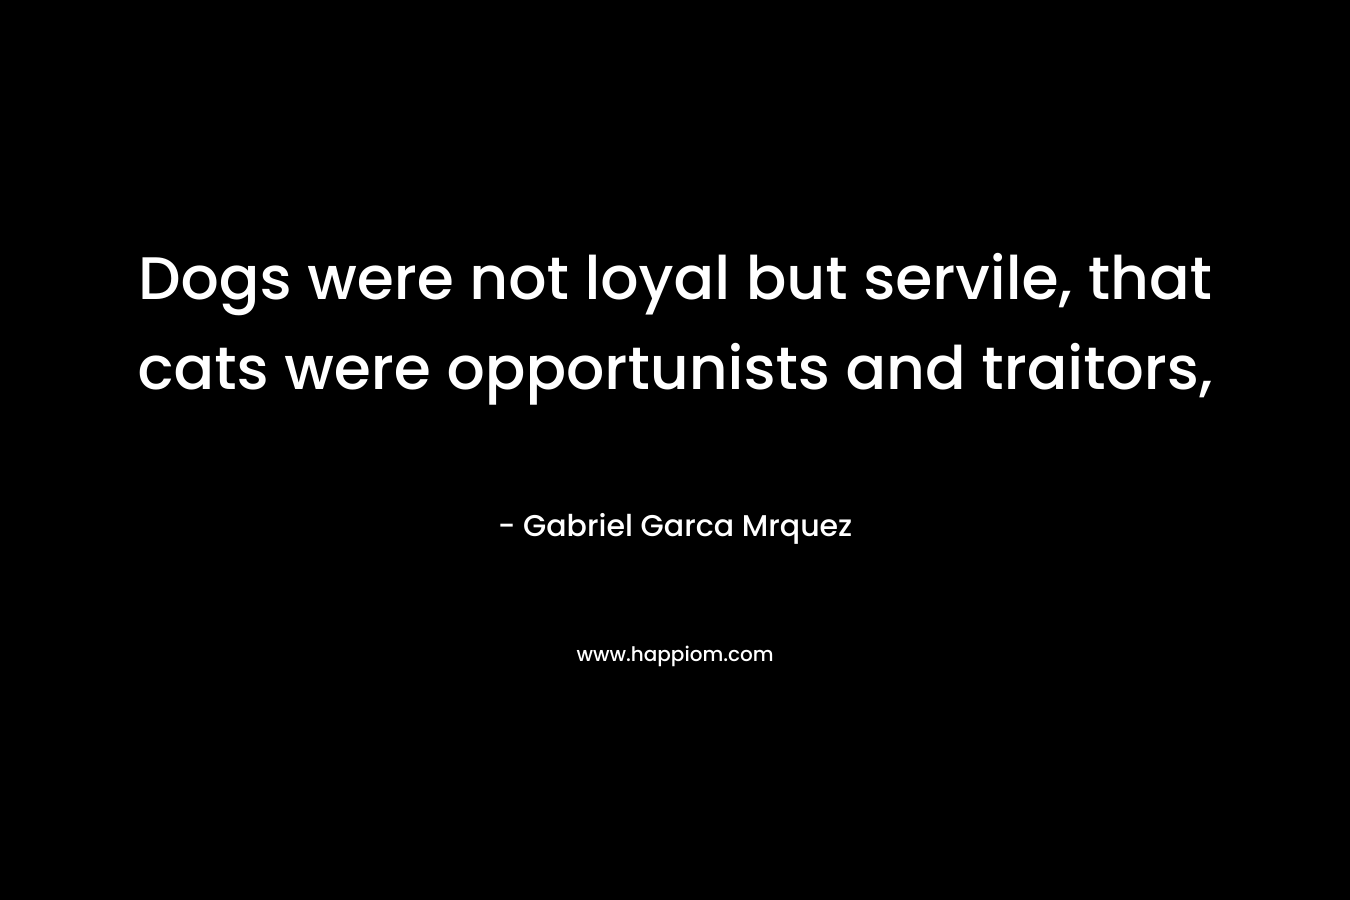 Dogs were not loyal but servile, that cats were opportunists and traitors, – Gabriel Garca Mrquez